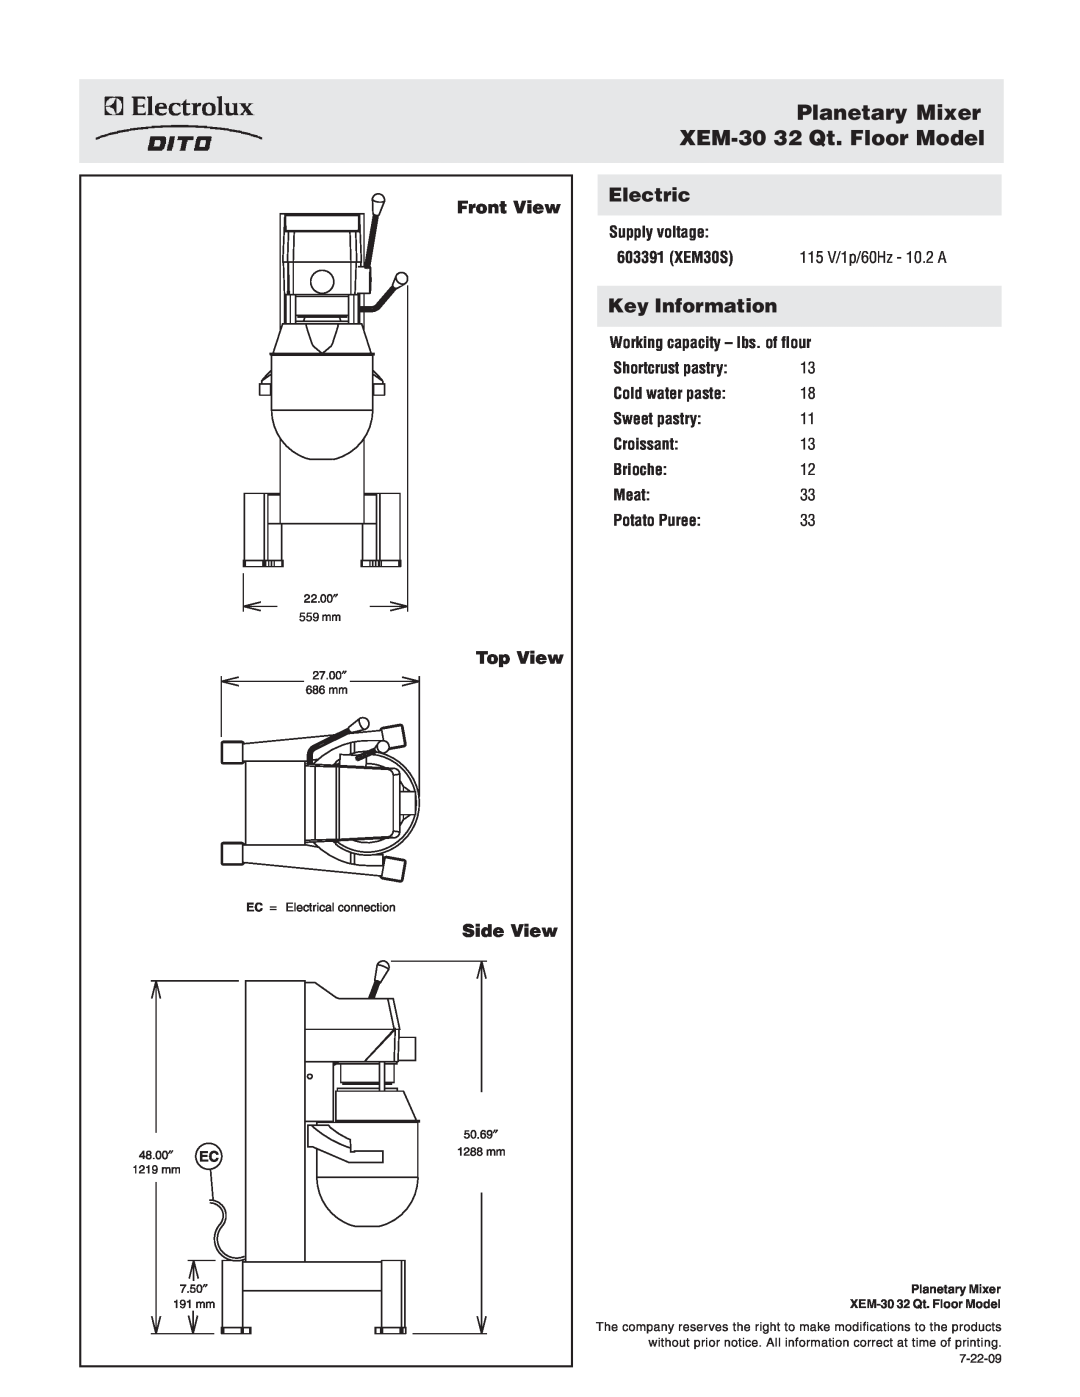 Electrolux 603391 Planetary Mixer XEM-30 32 Qt. Floor Model, Front View, Top View Side View, Electric, Key Information 